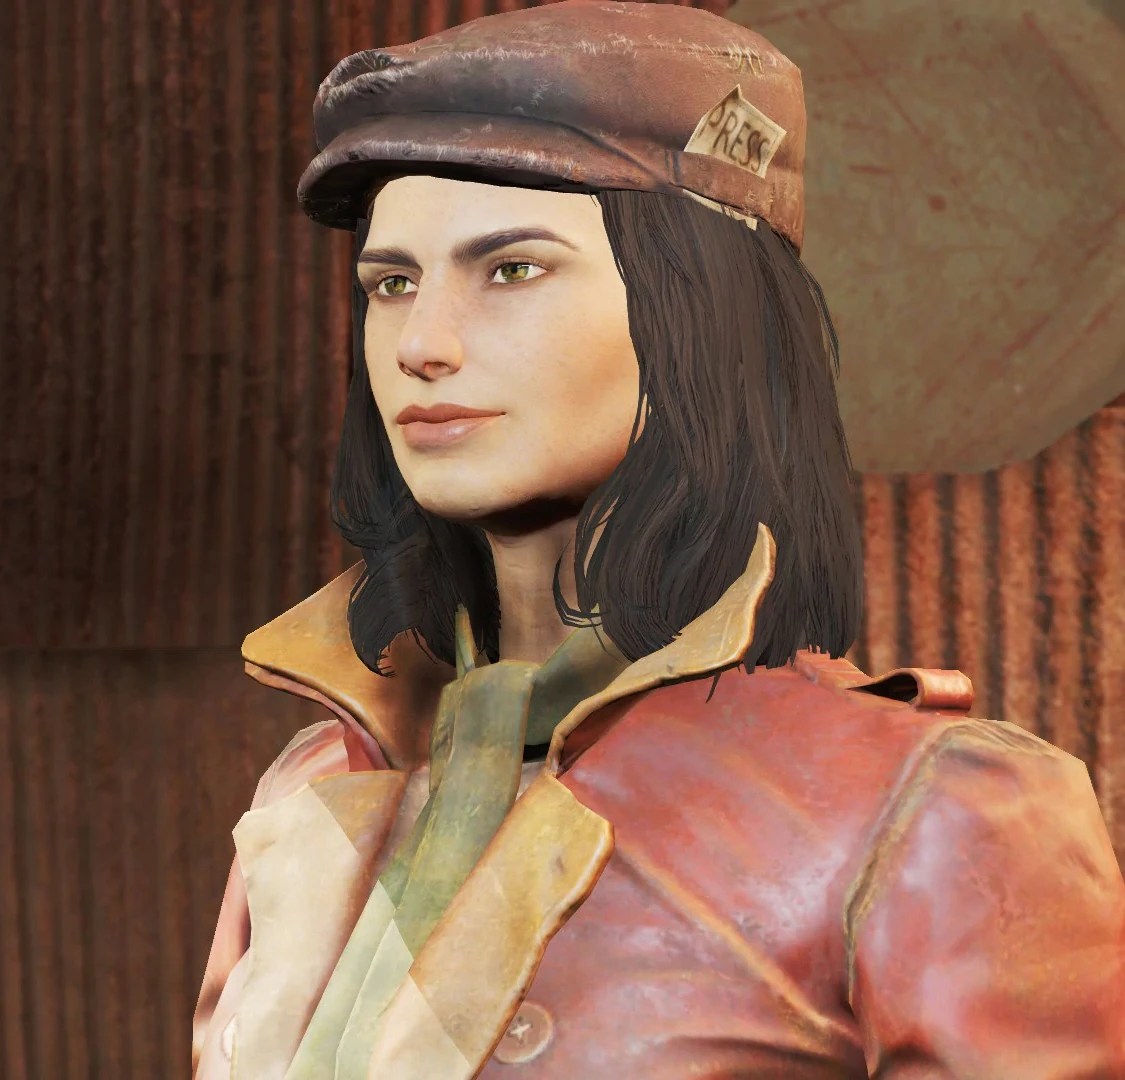 How old is piper fallout 4